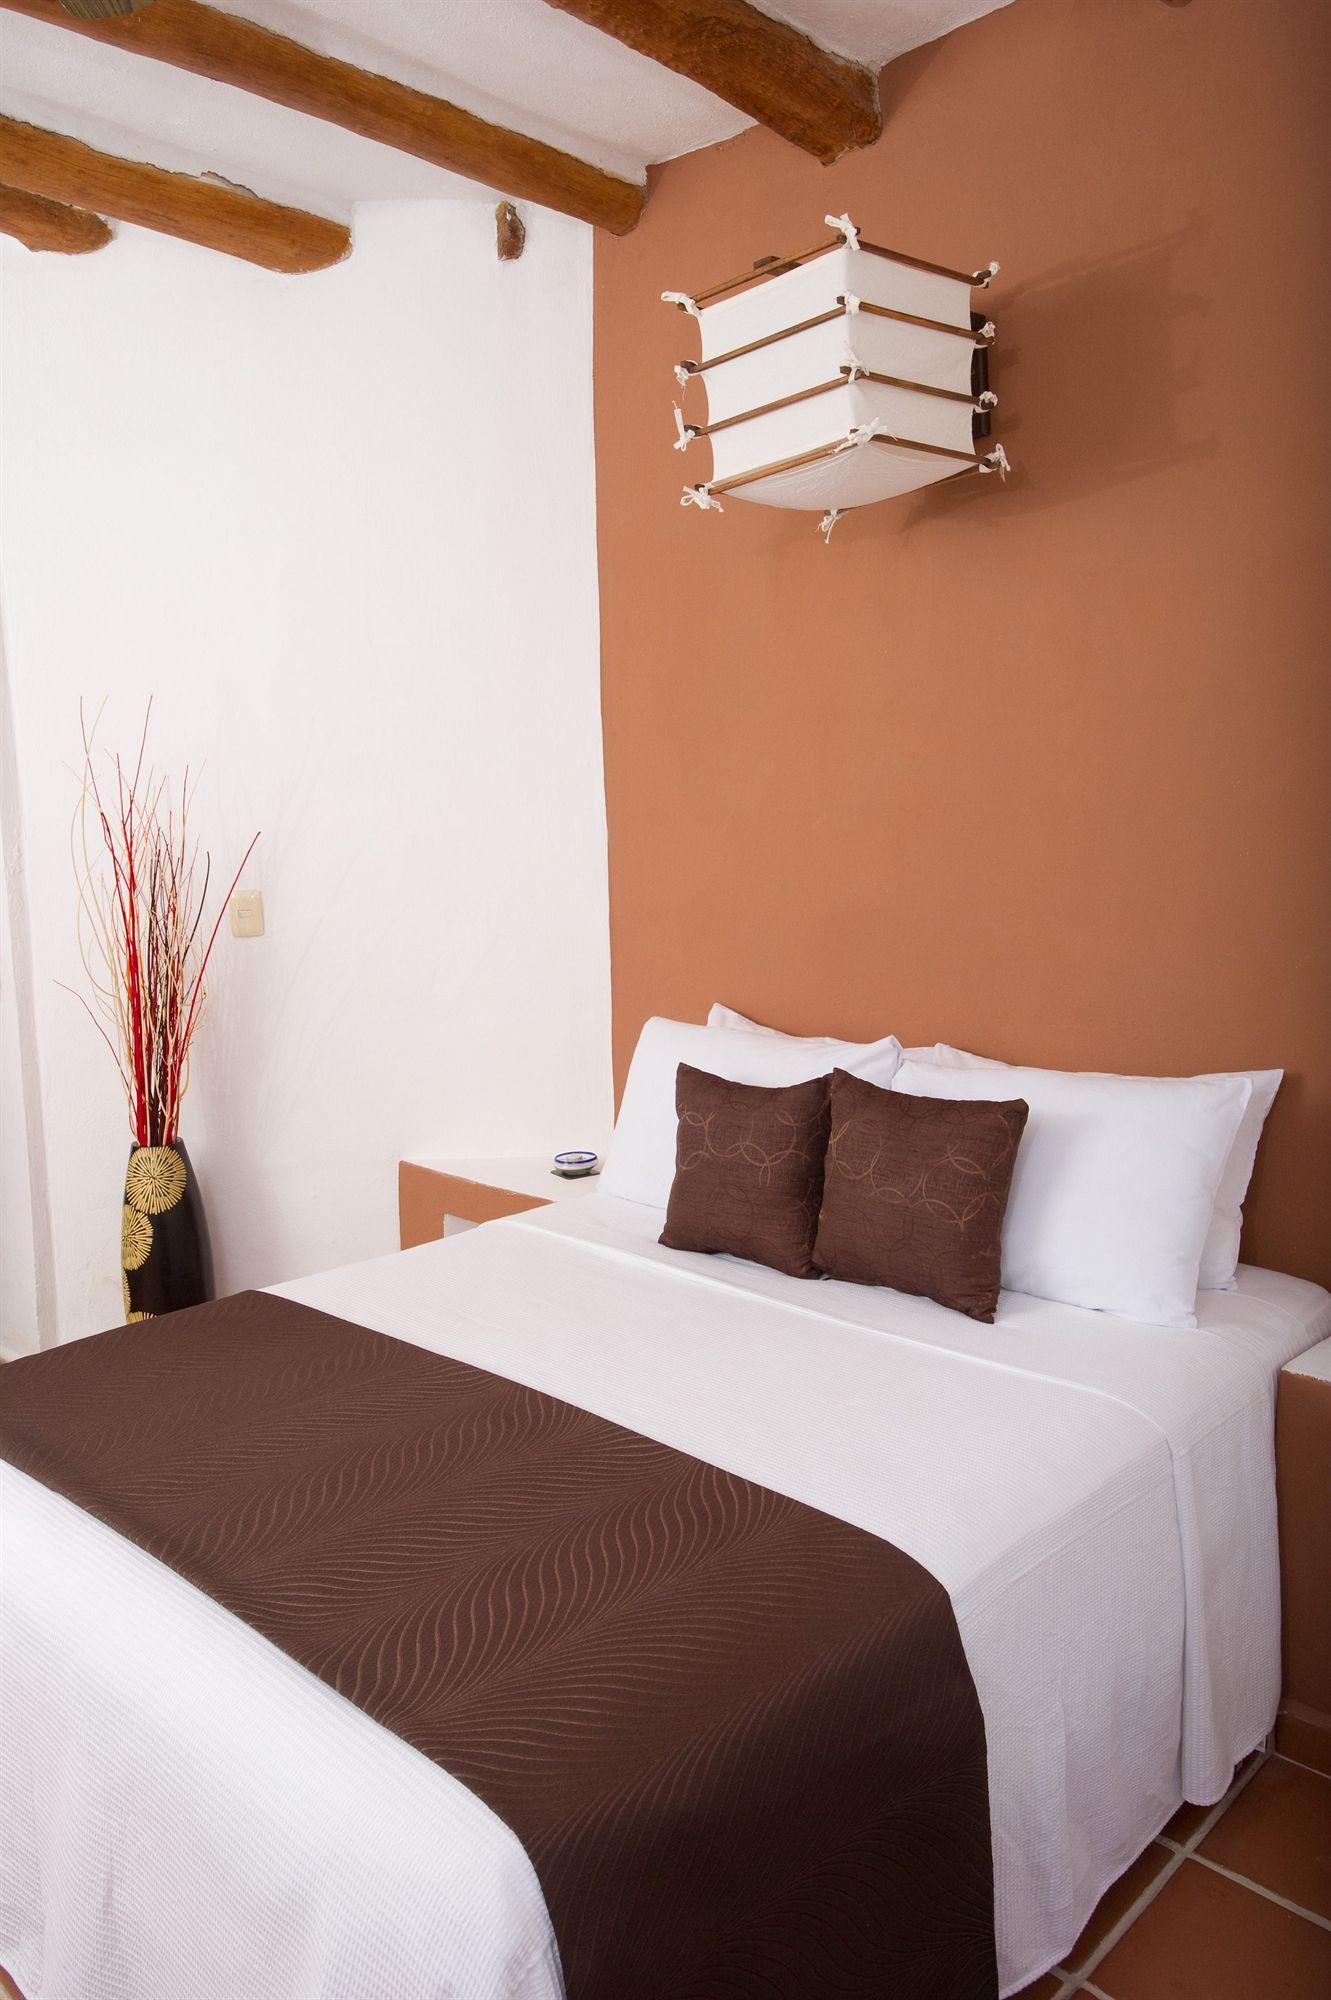 87d6f3a1-c716-4f5e-bcf4-90733b5b56de Holbox Dream Beachfront Hotel By Xperience Hotels